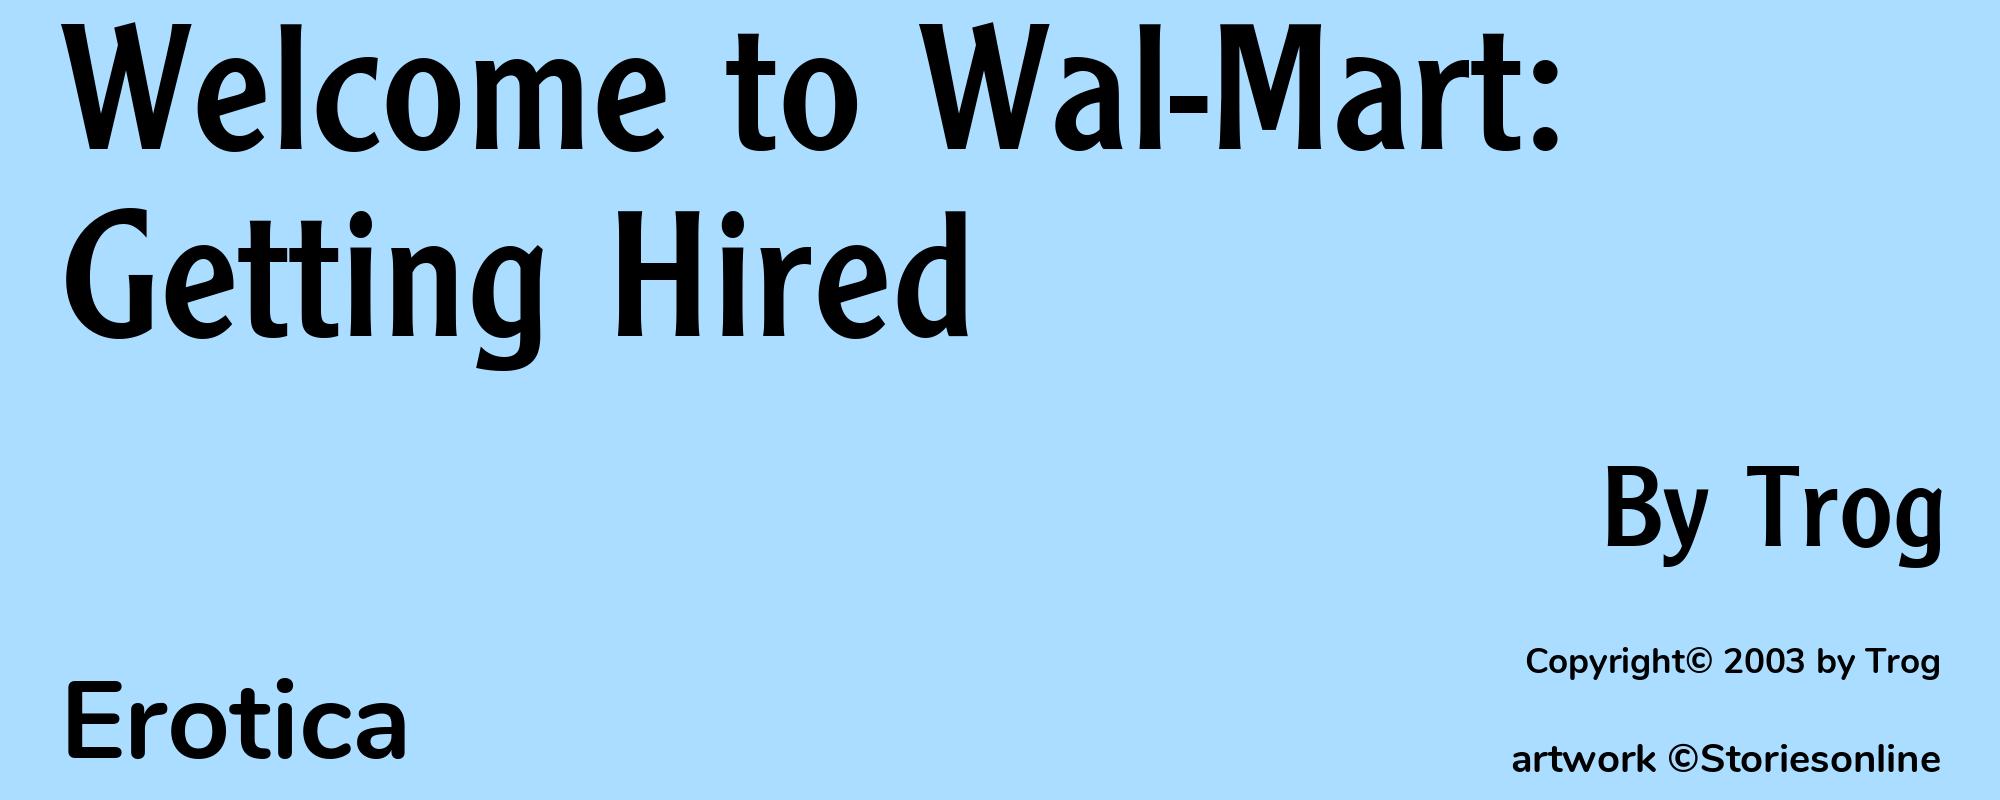 Welcome to Wal-Mart: Getting Hired - Cover